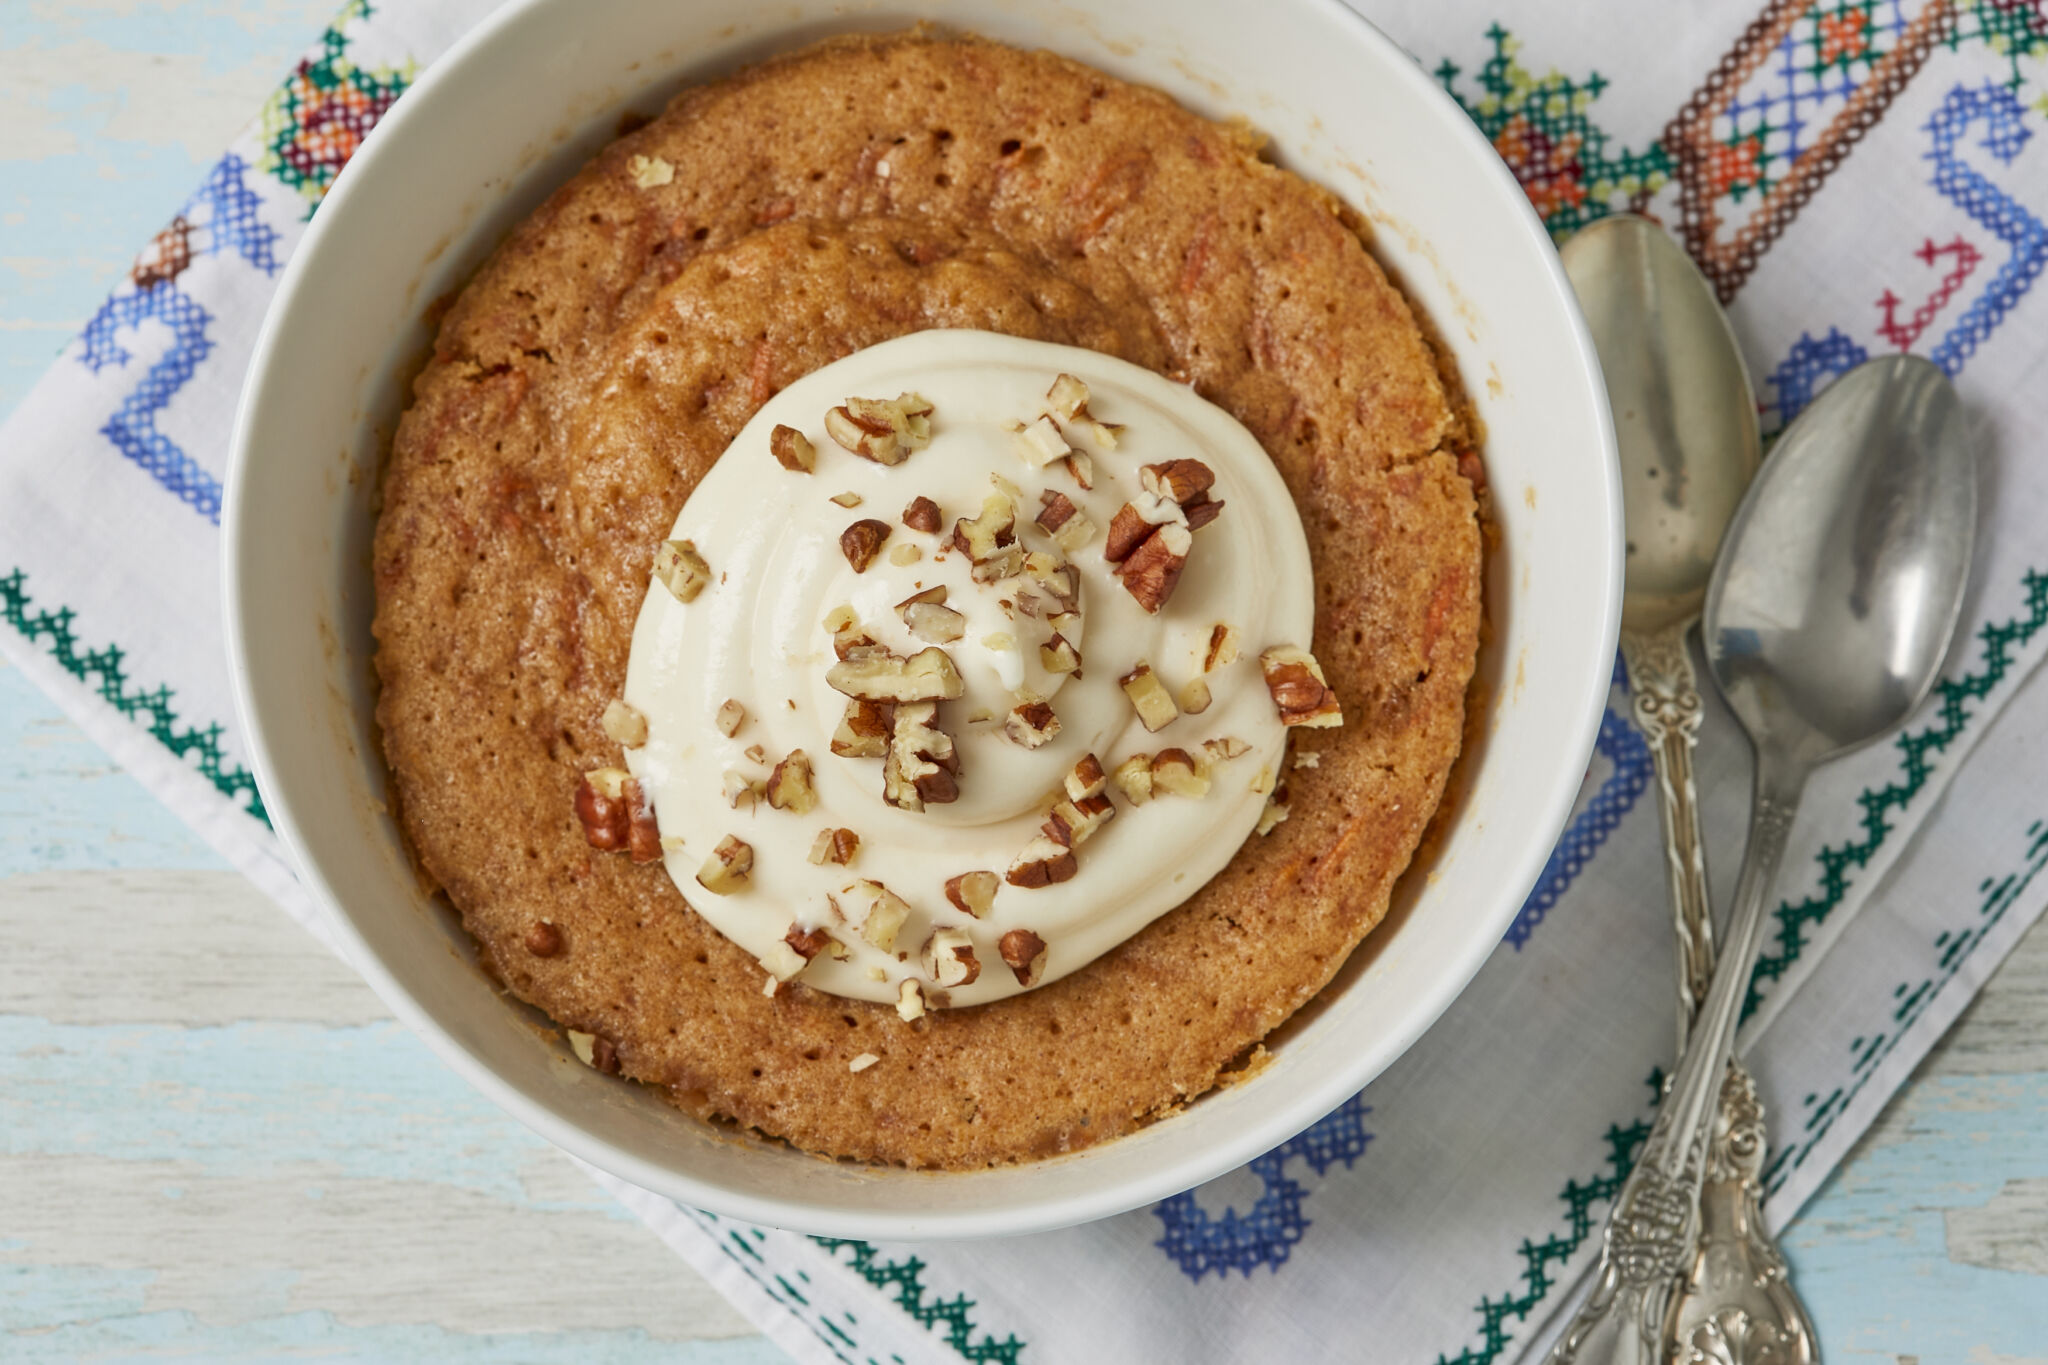 A soft, fluffy Carrot Cake, spiced with cinnamon and vanilla, topped with creamy tangy frosting and aromatic toasted nuts, made fast in one bowl!